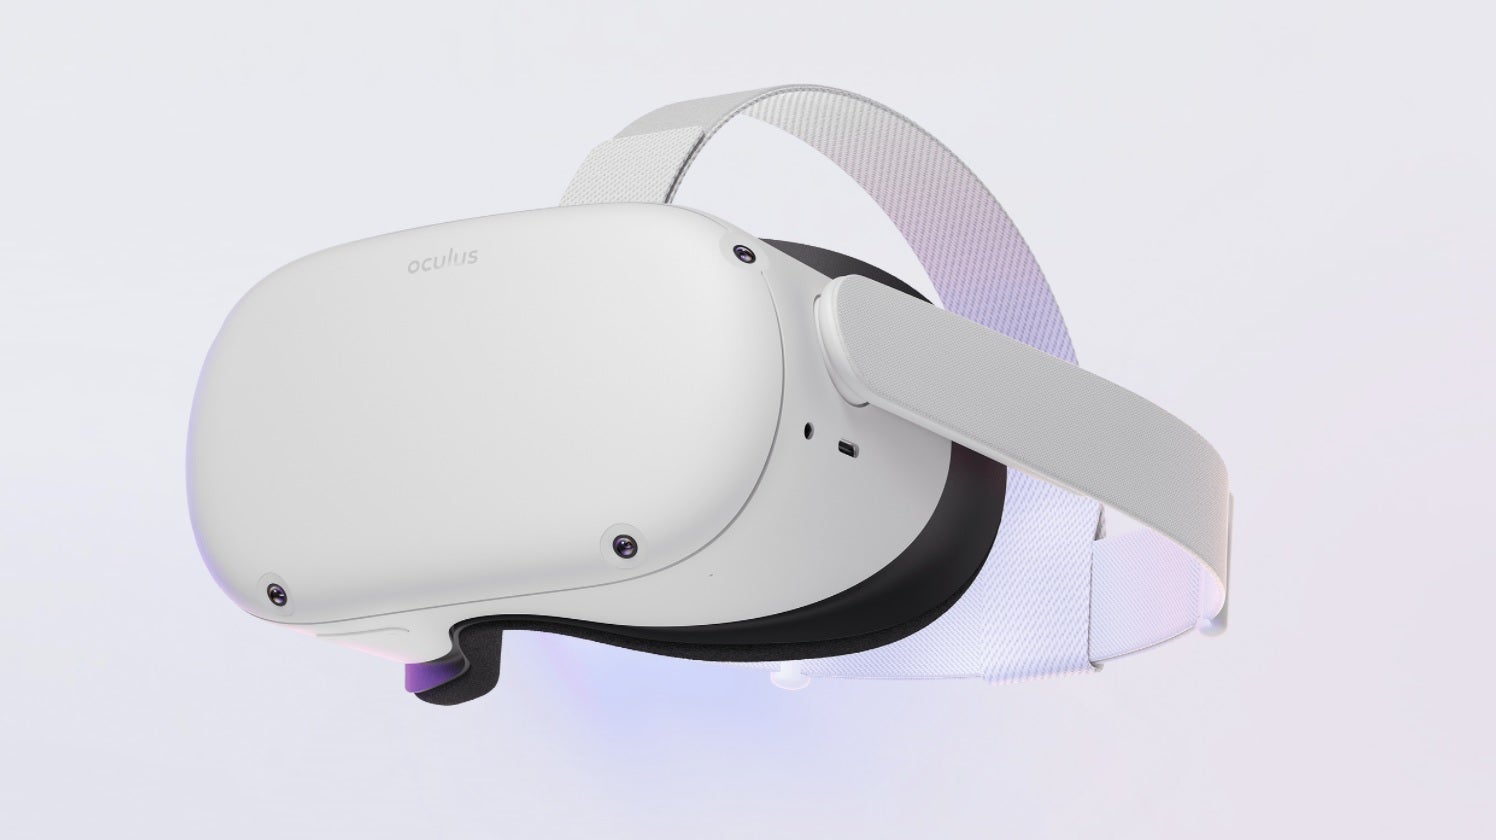 Oculus Quest 2 headset on a white background